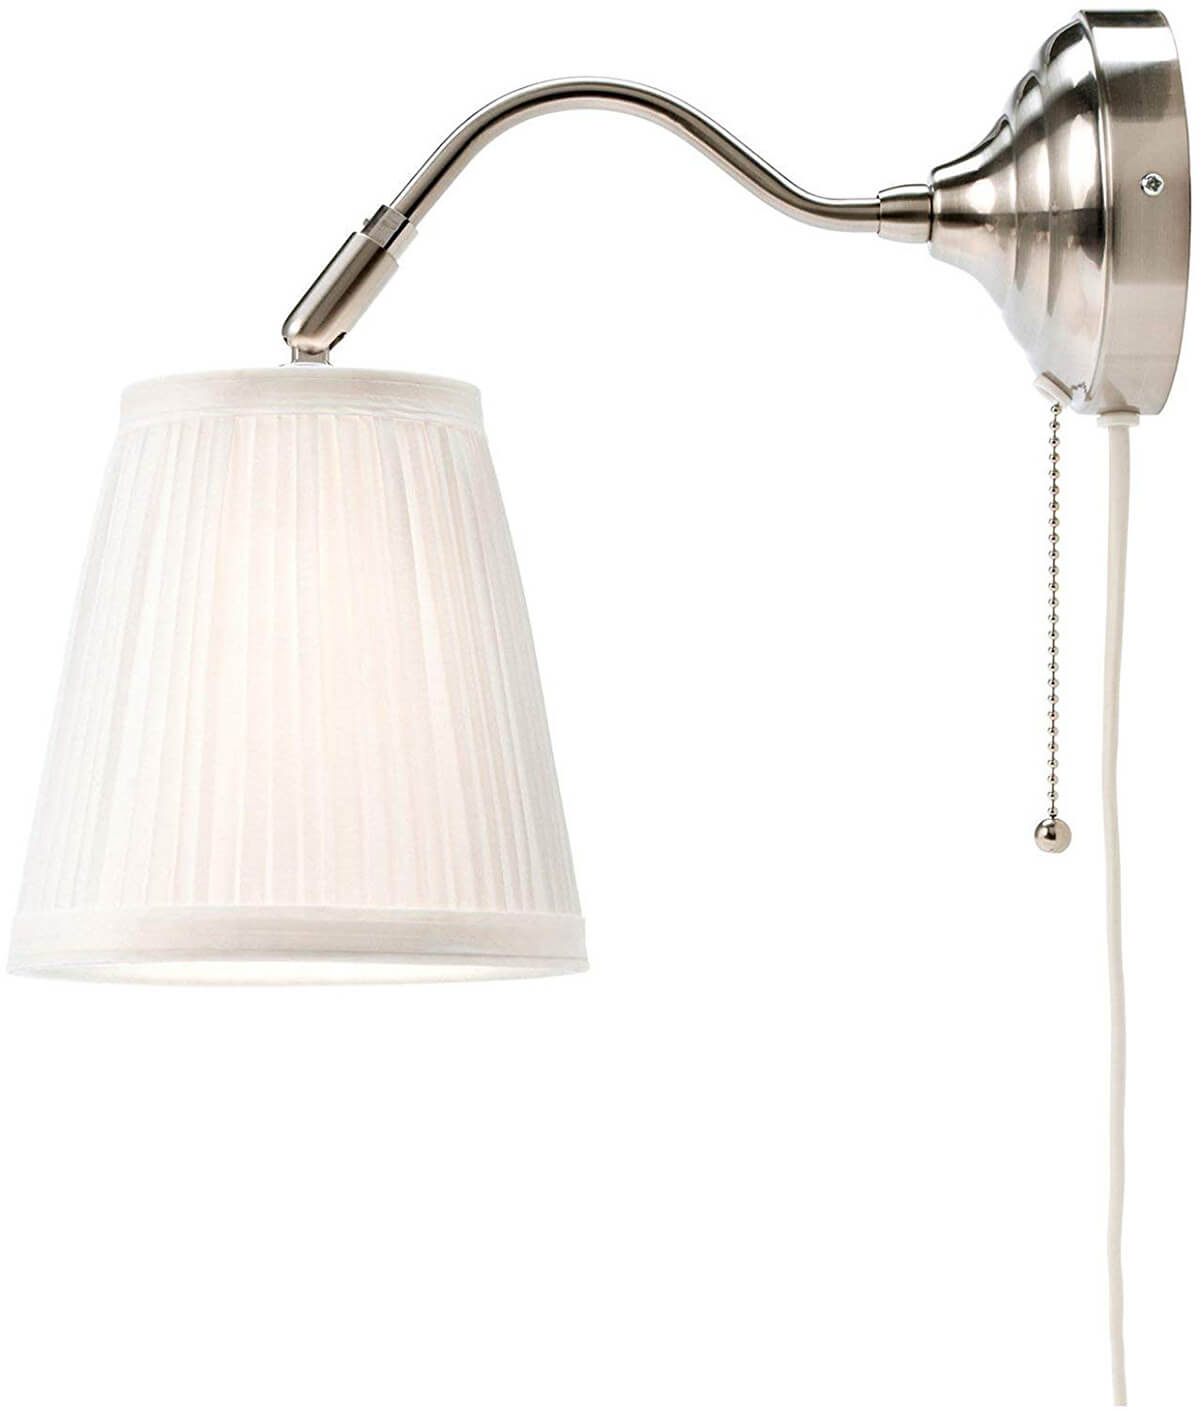 Bright White and Silver Contemporary Wall Lamp